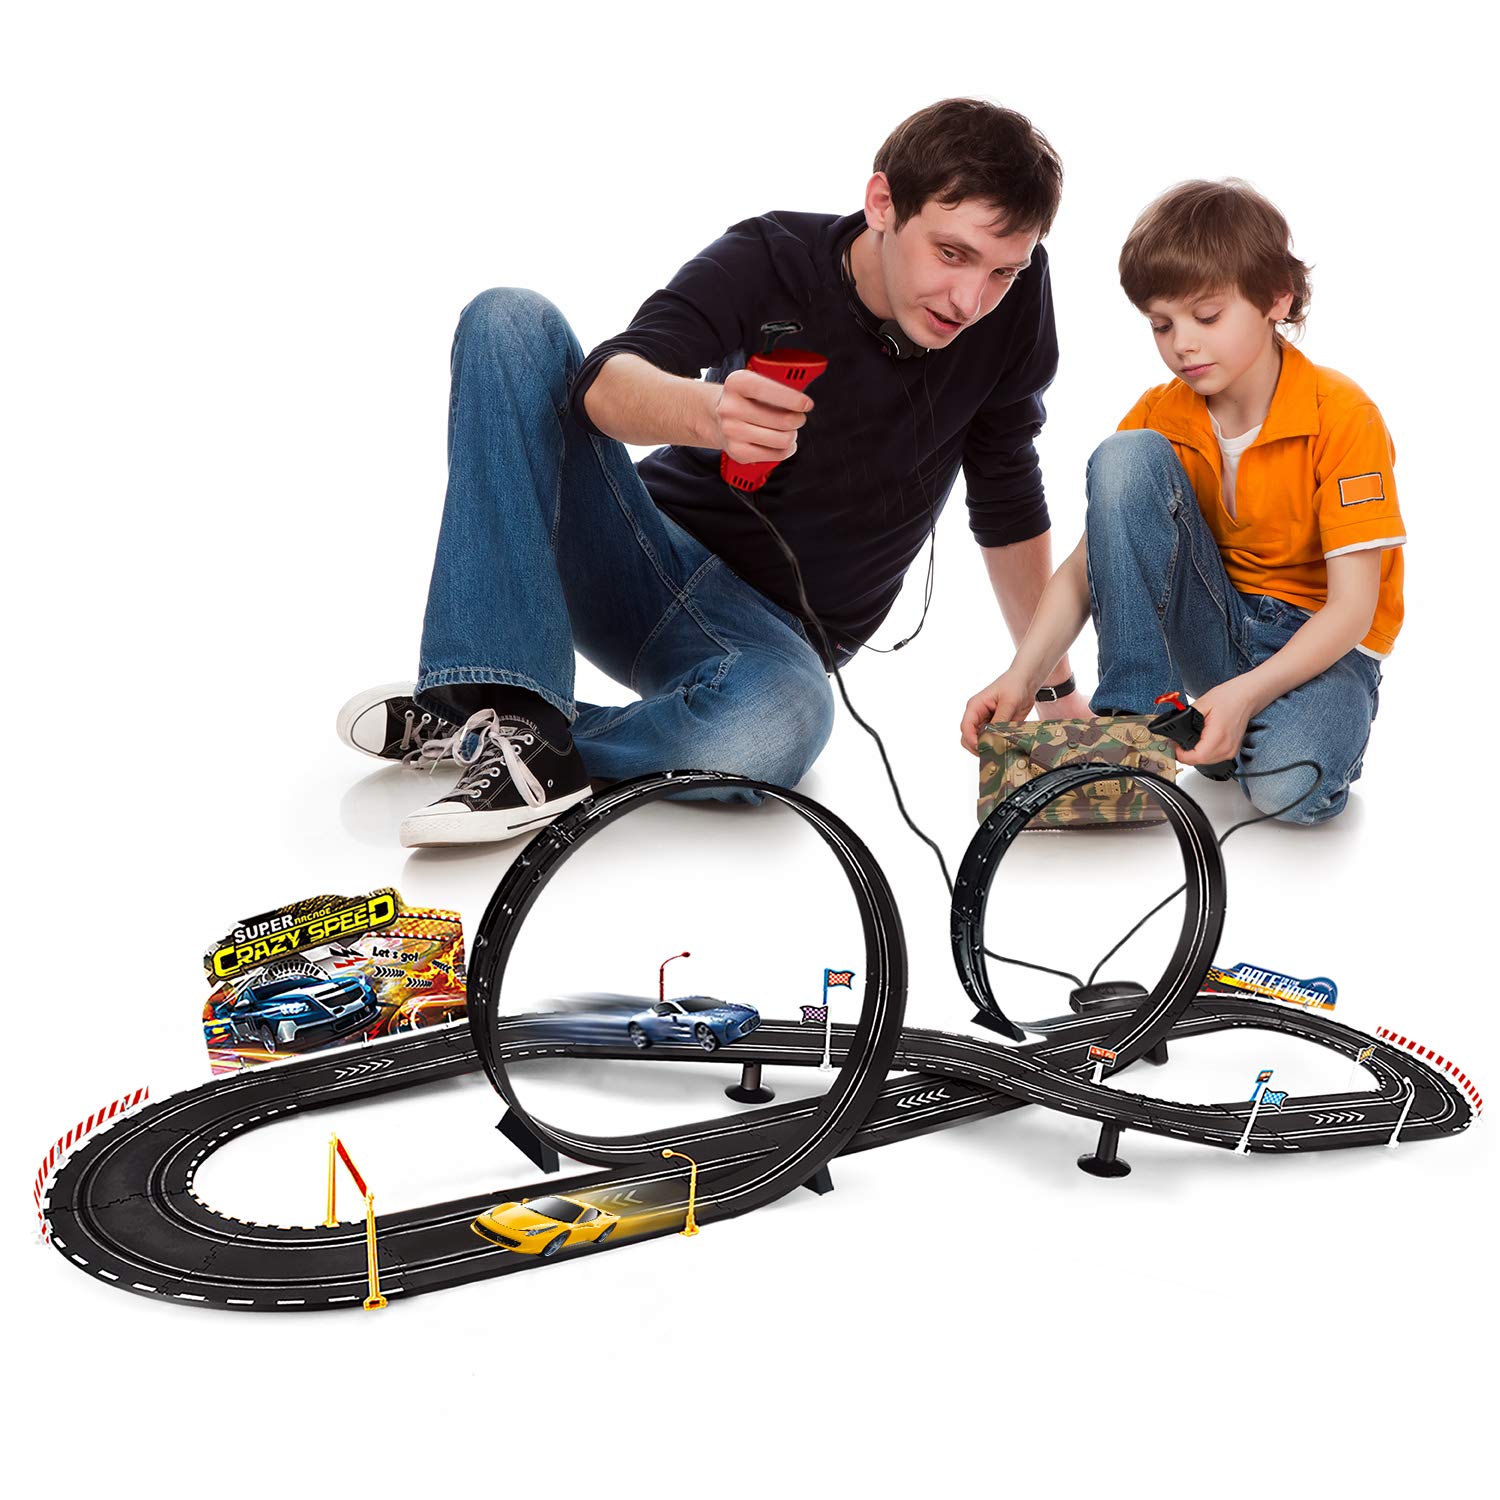 Kids Toy-Electric Powered Slot Car Race Track Set Boys Toys for 3 4 5 6 7 8-16 Years Old Boy Girl Best Gifts